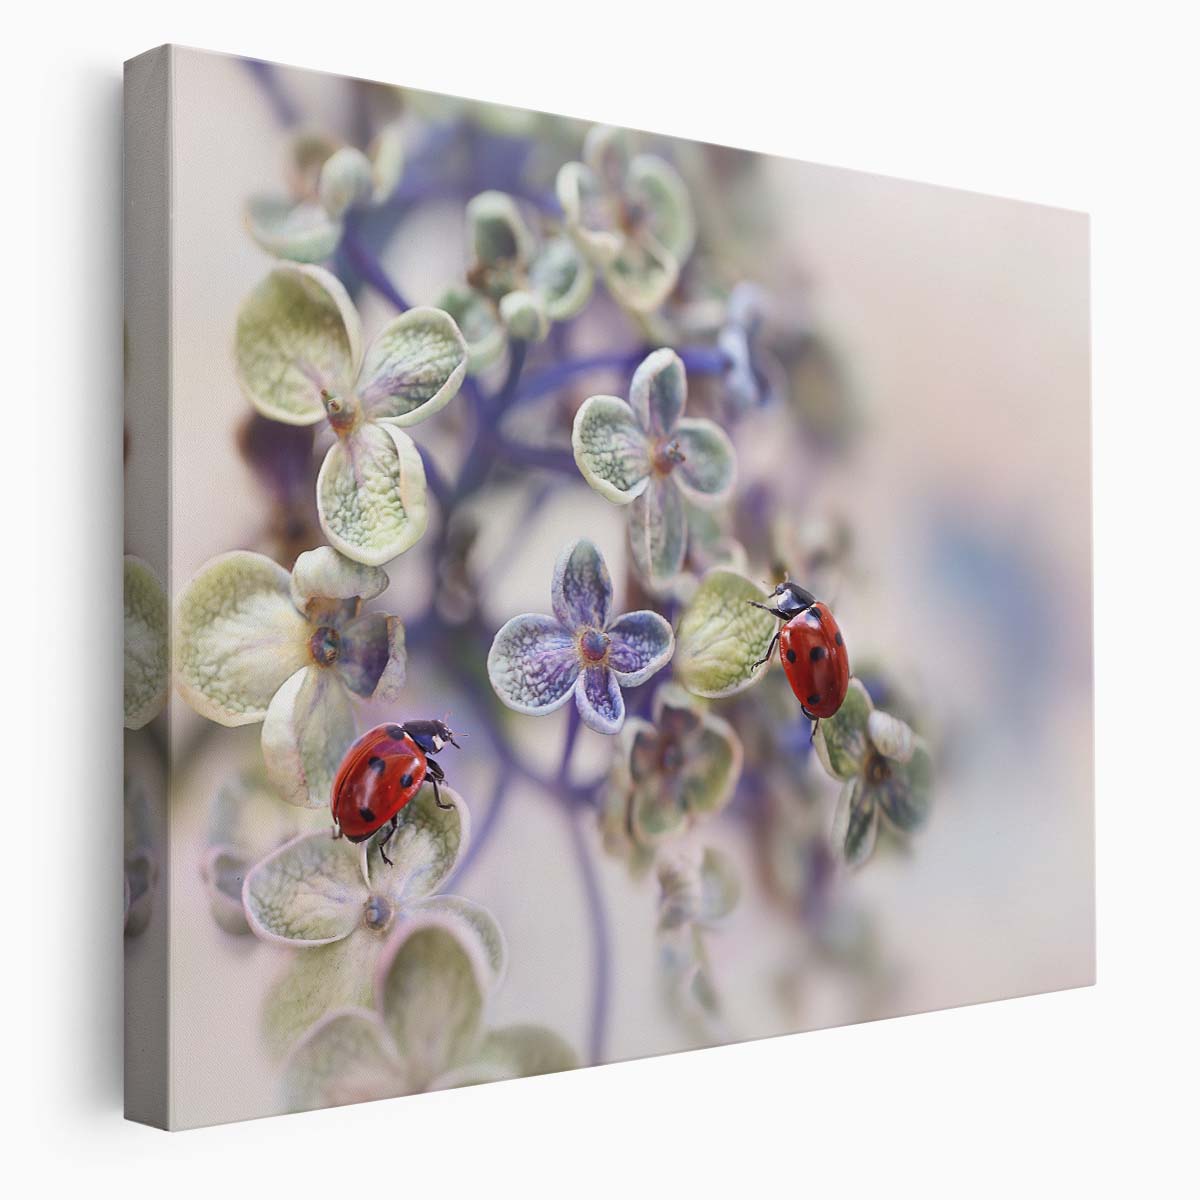 Macro Floral Ladybug Encounter Nature Wall Art by Luxuriance Designs. Made in USA.